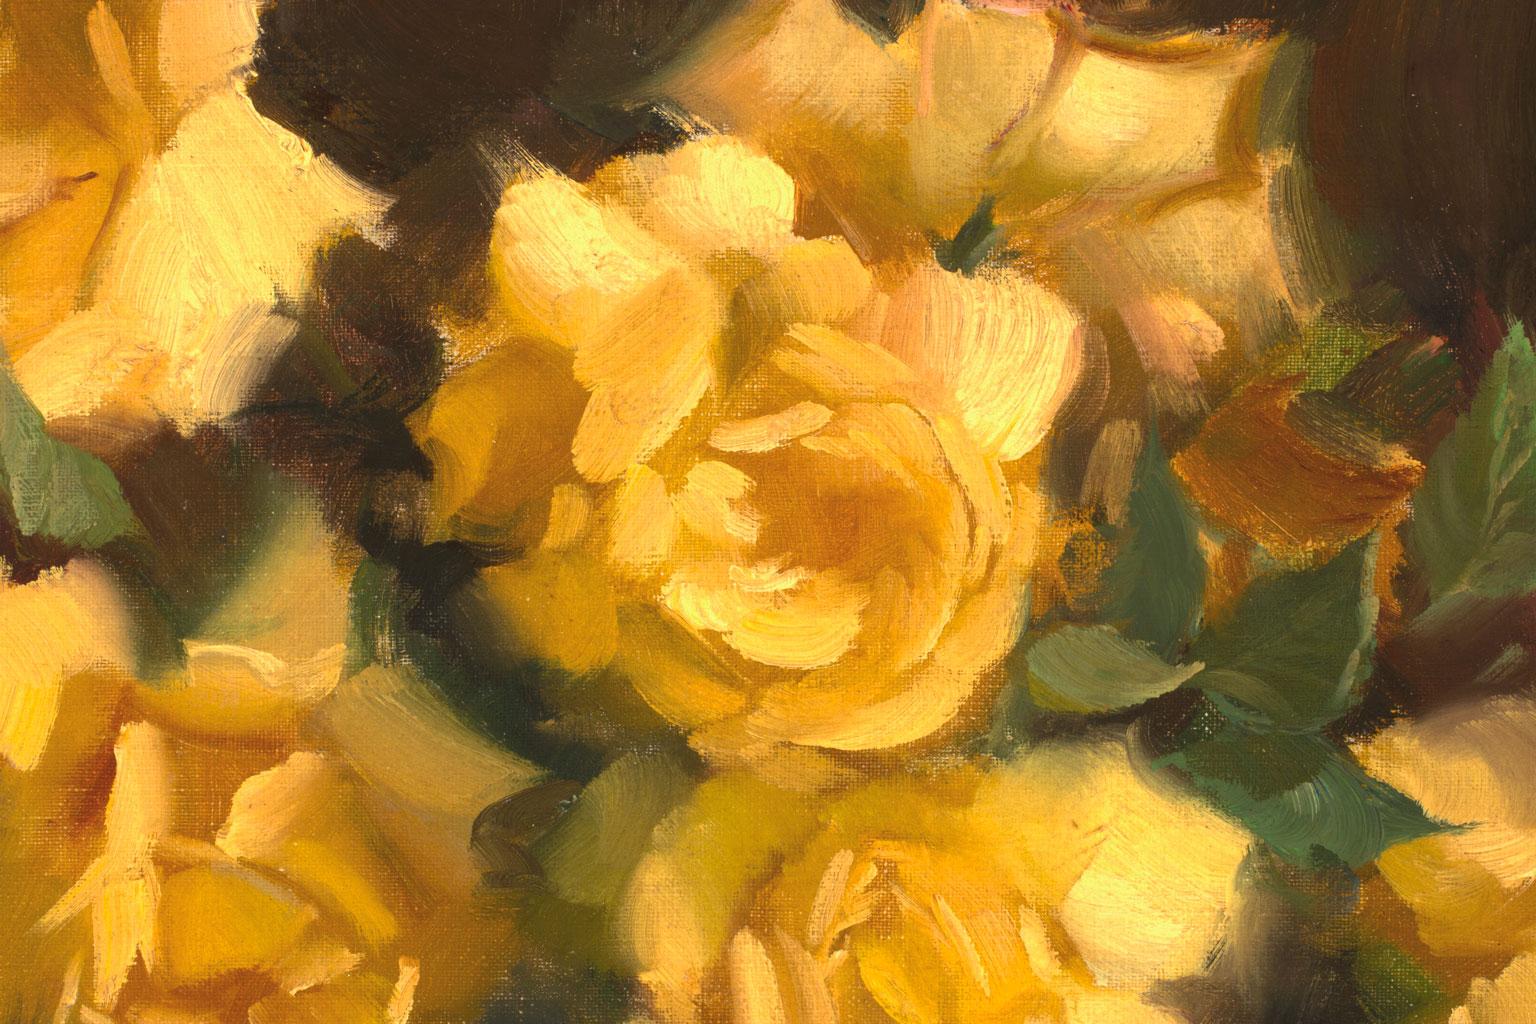 [Yellow Roses] Floral Still Life Oil Painting on Canvas by Vernon Kerr, Framed 1